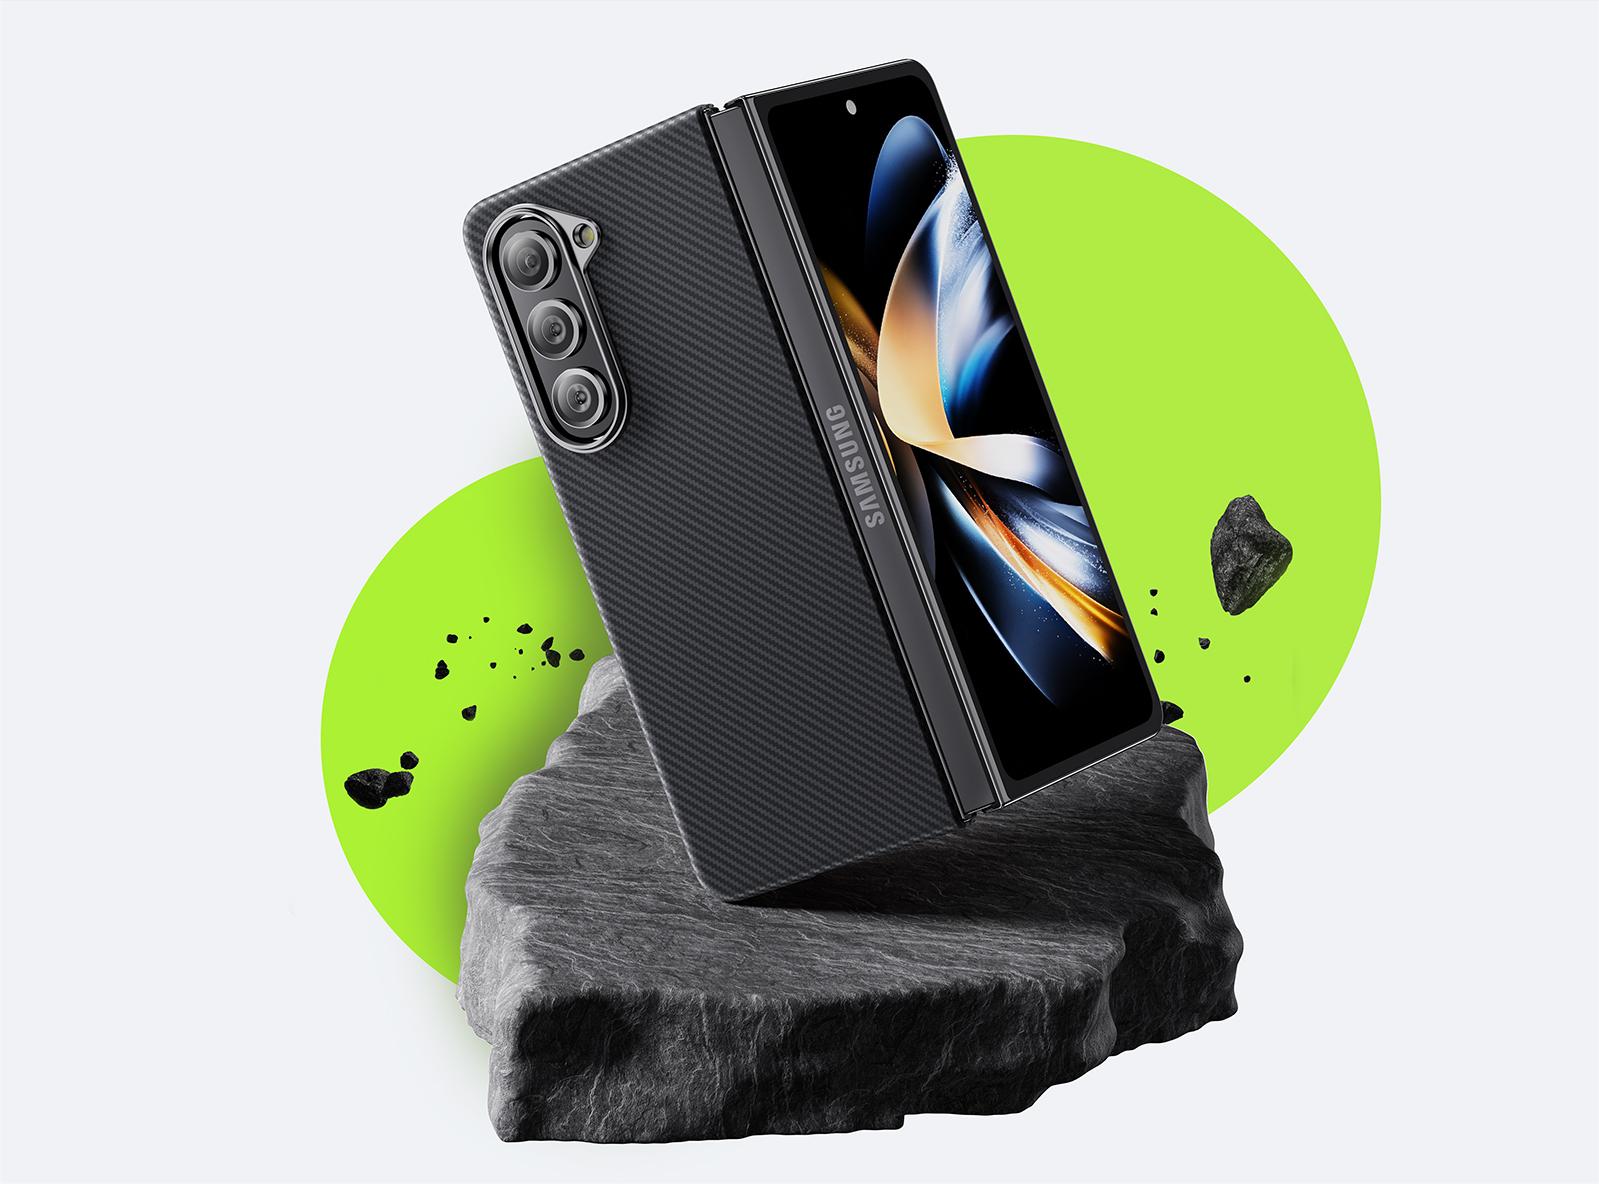 Z Fold 6 cases for Galaxy Z Fold 6, showcasing premium protection and style for Galaxy Z Fold 6. The ultimate Z Fold 6 cases designed exclusively for Galaxy Z Fold 6, ensuring durability and elegance for your Galaxy Z Fold 6.